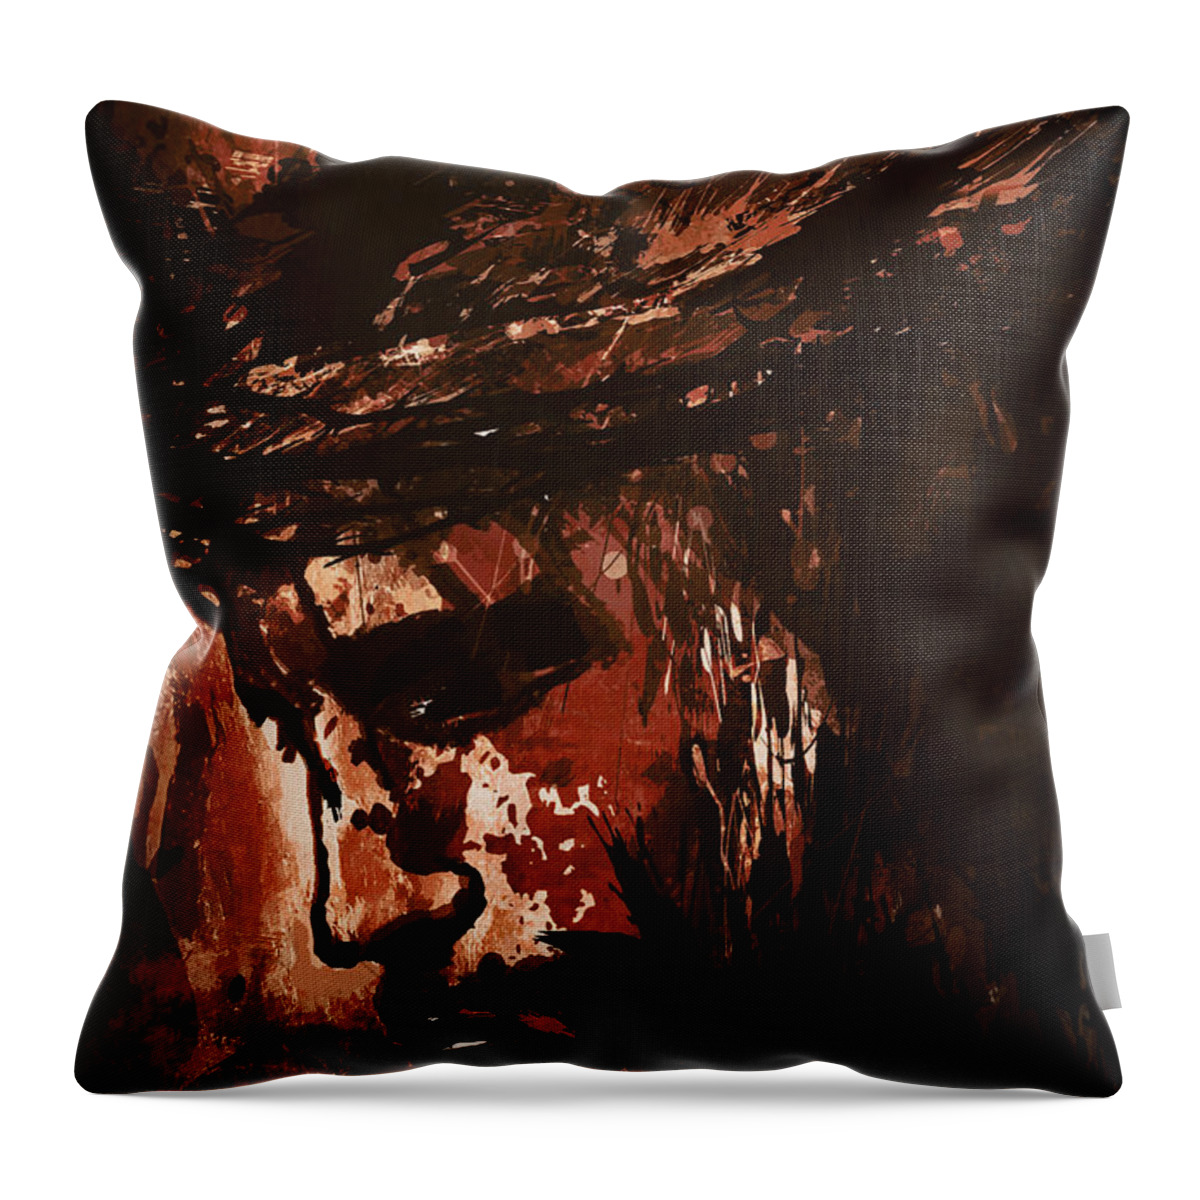 Catholic Throw Pillow featuring the painting The Passion by Andrzej Szczerski